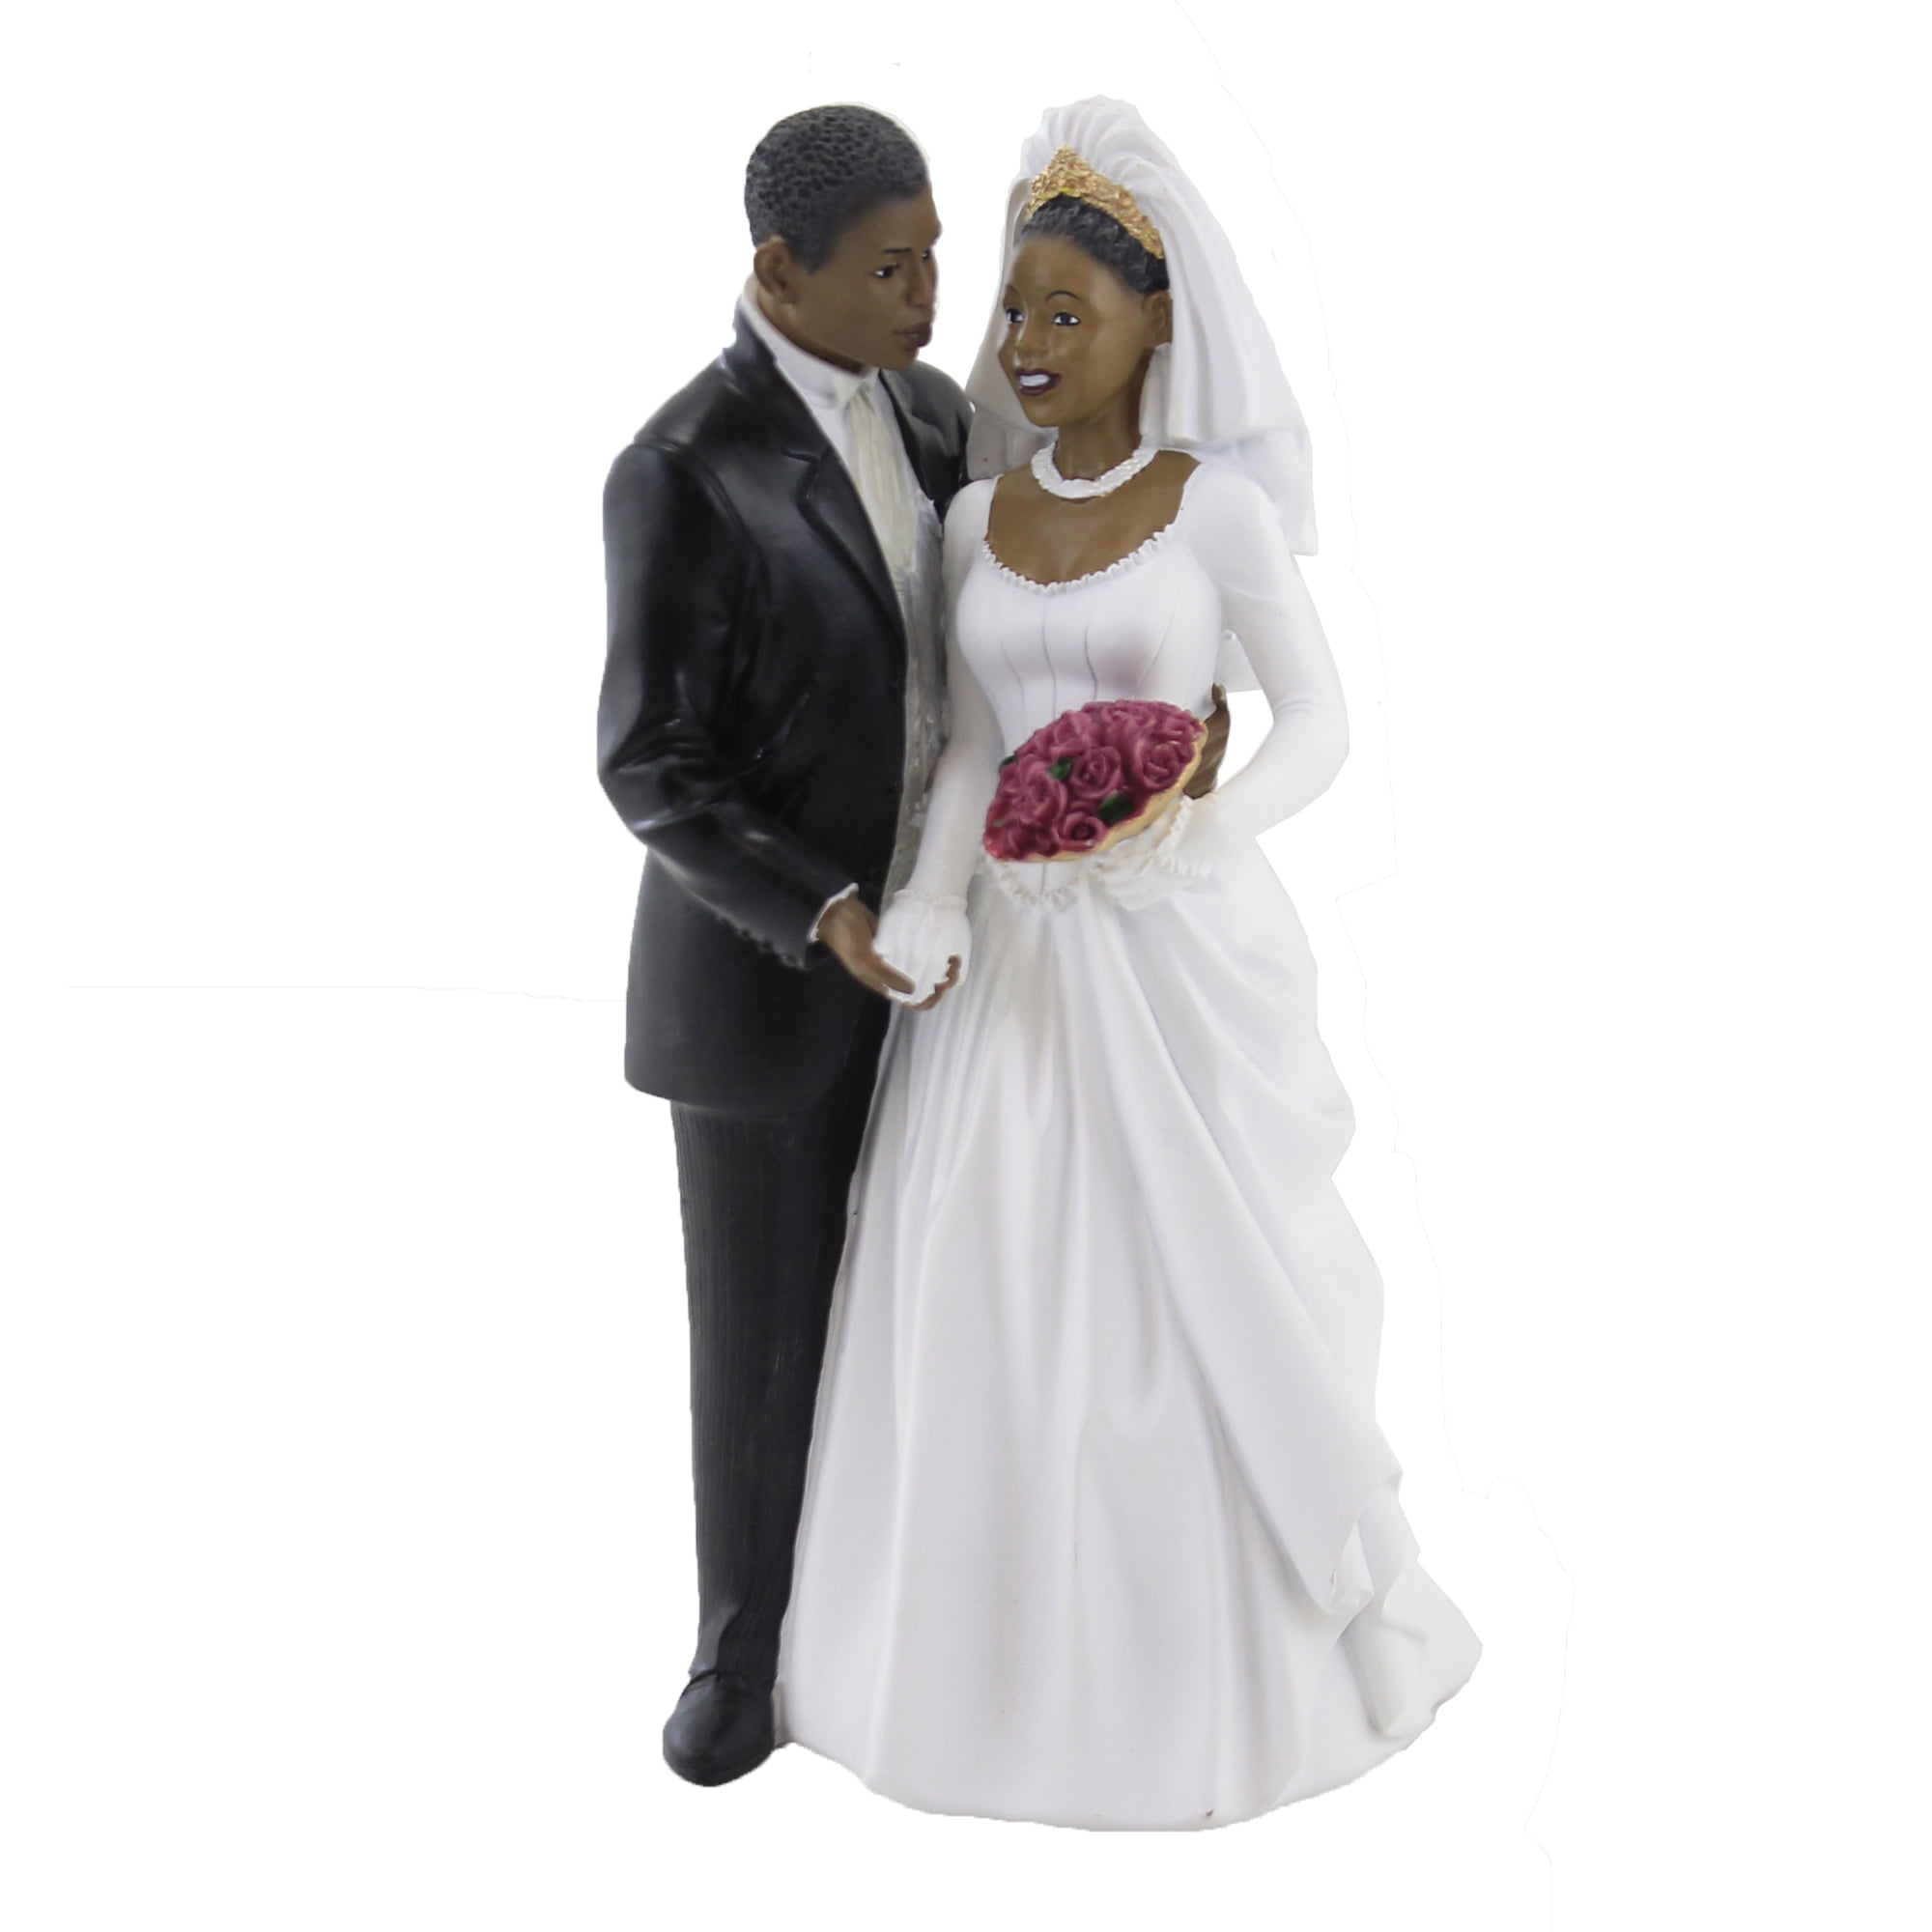 Funny Wedding Cake Toppers Figurine Bride Groom Humor Favor Marriage Gift Topper 